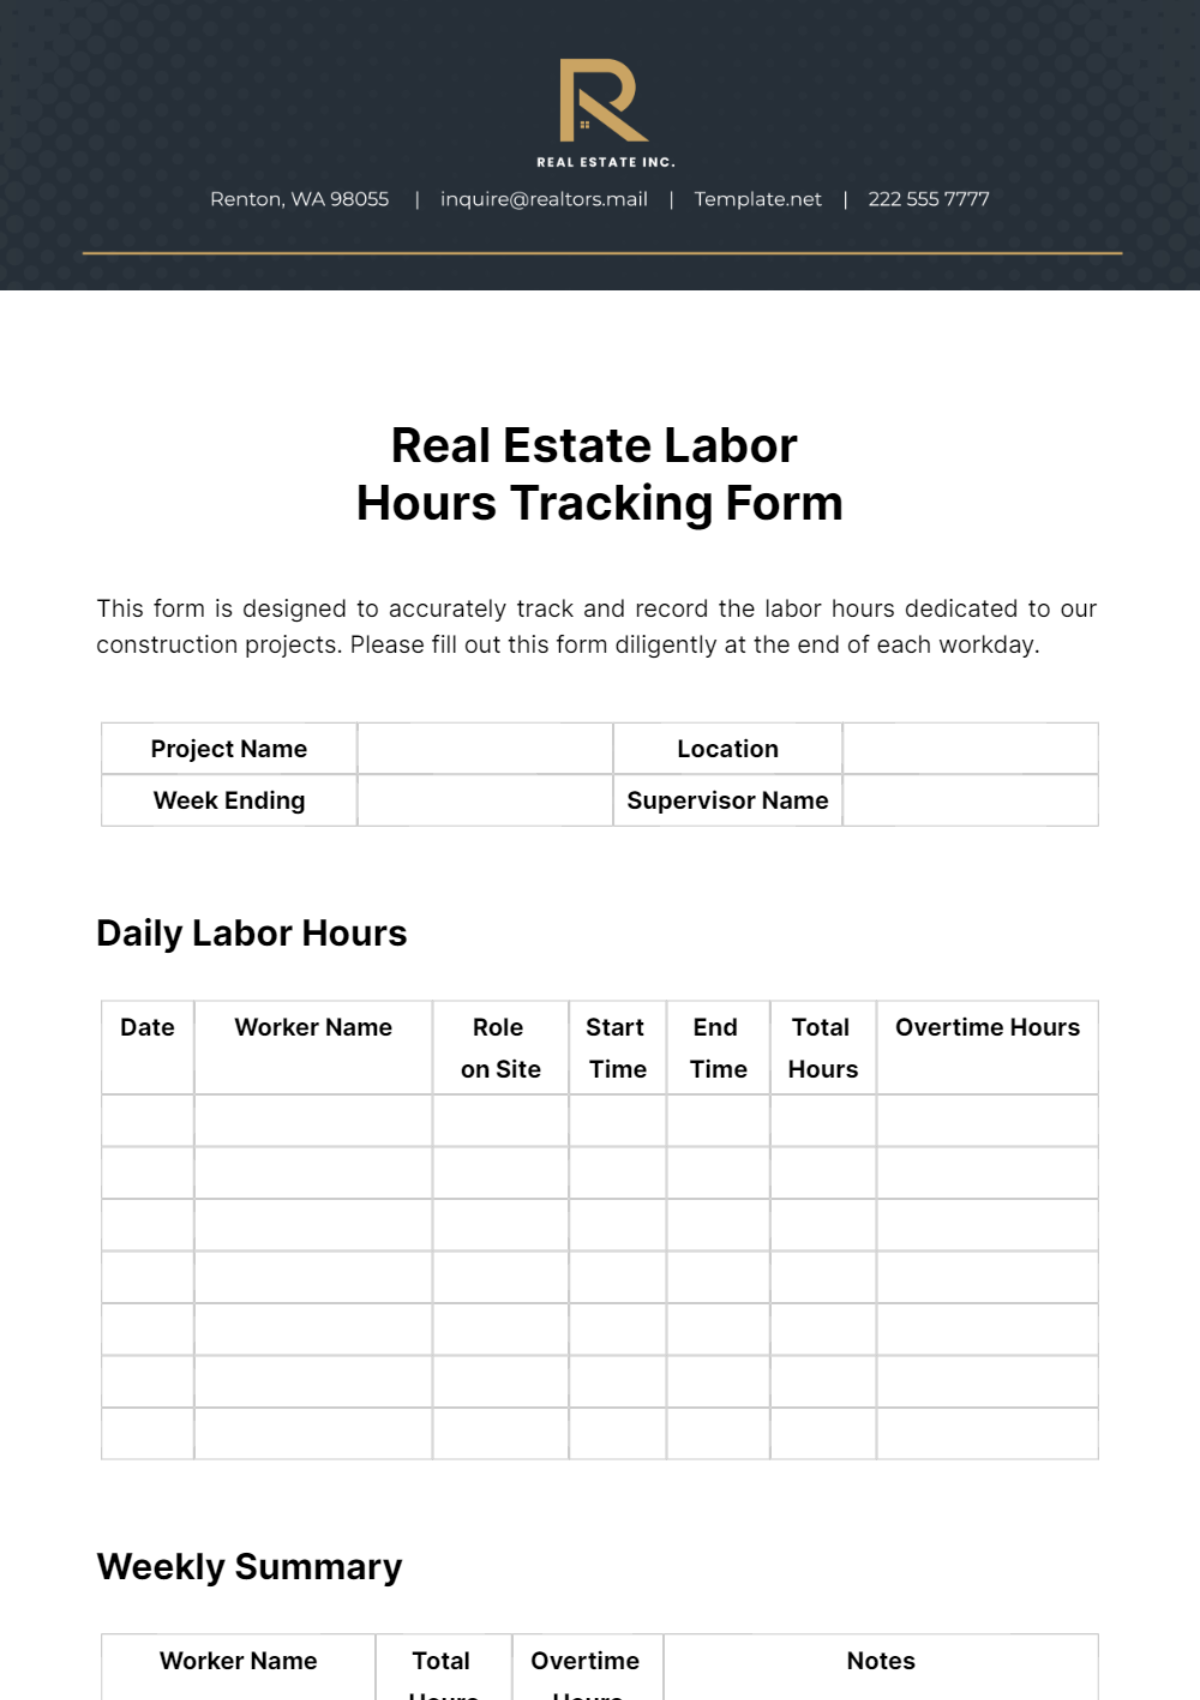 Real Estate Labor Hours Tracking Form Template